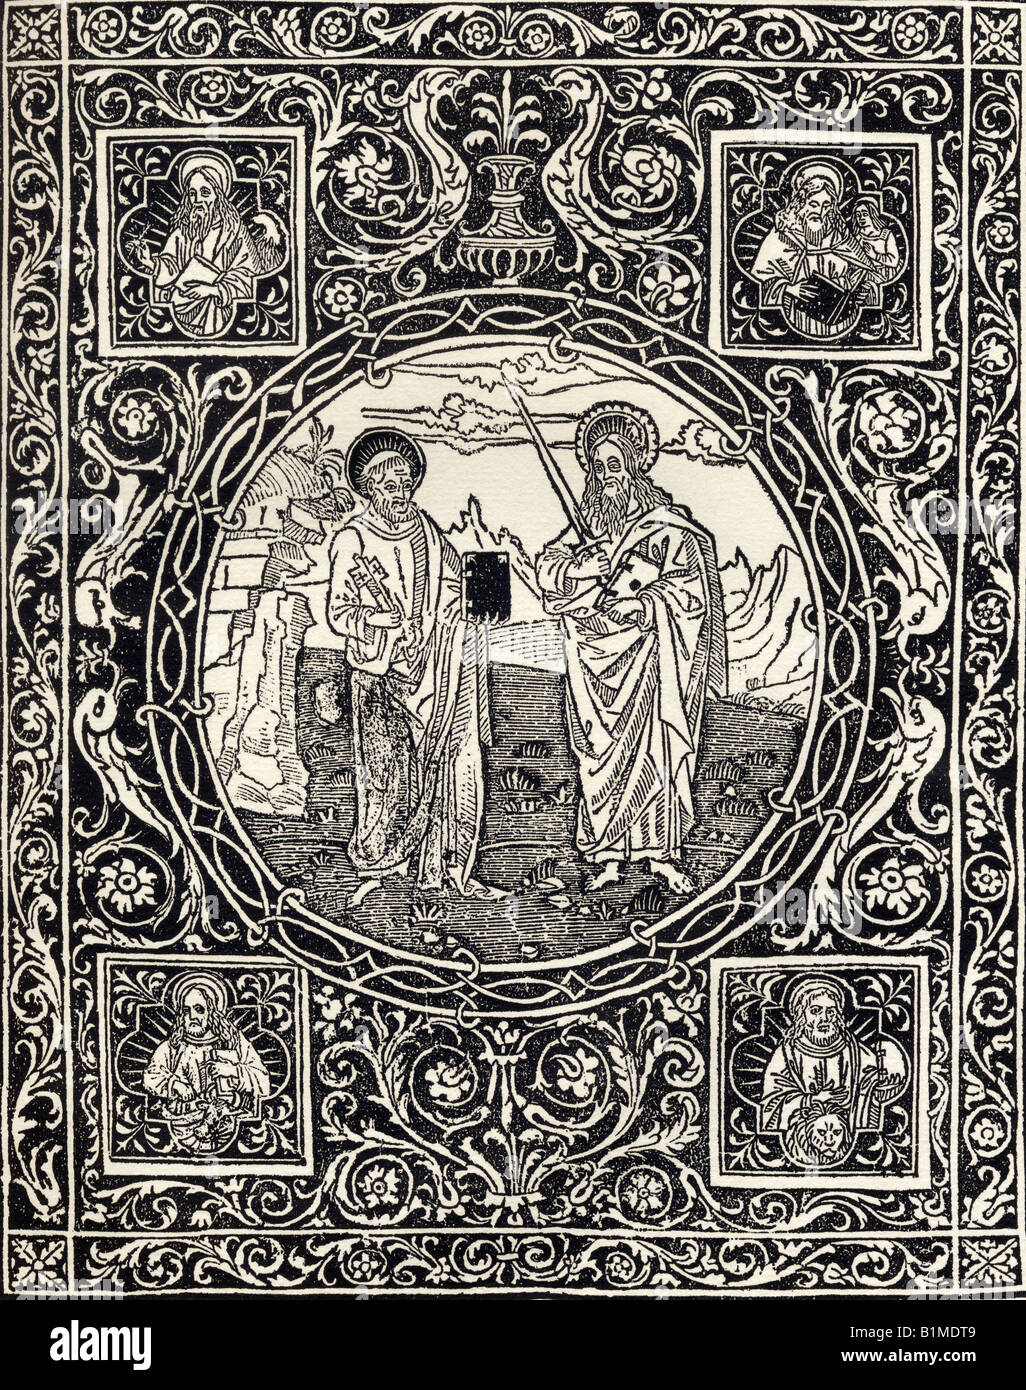 Facsimile of the title page of Arabesque design with full length figures of the saints Peter and Paul. Stock Photo